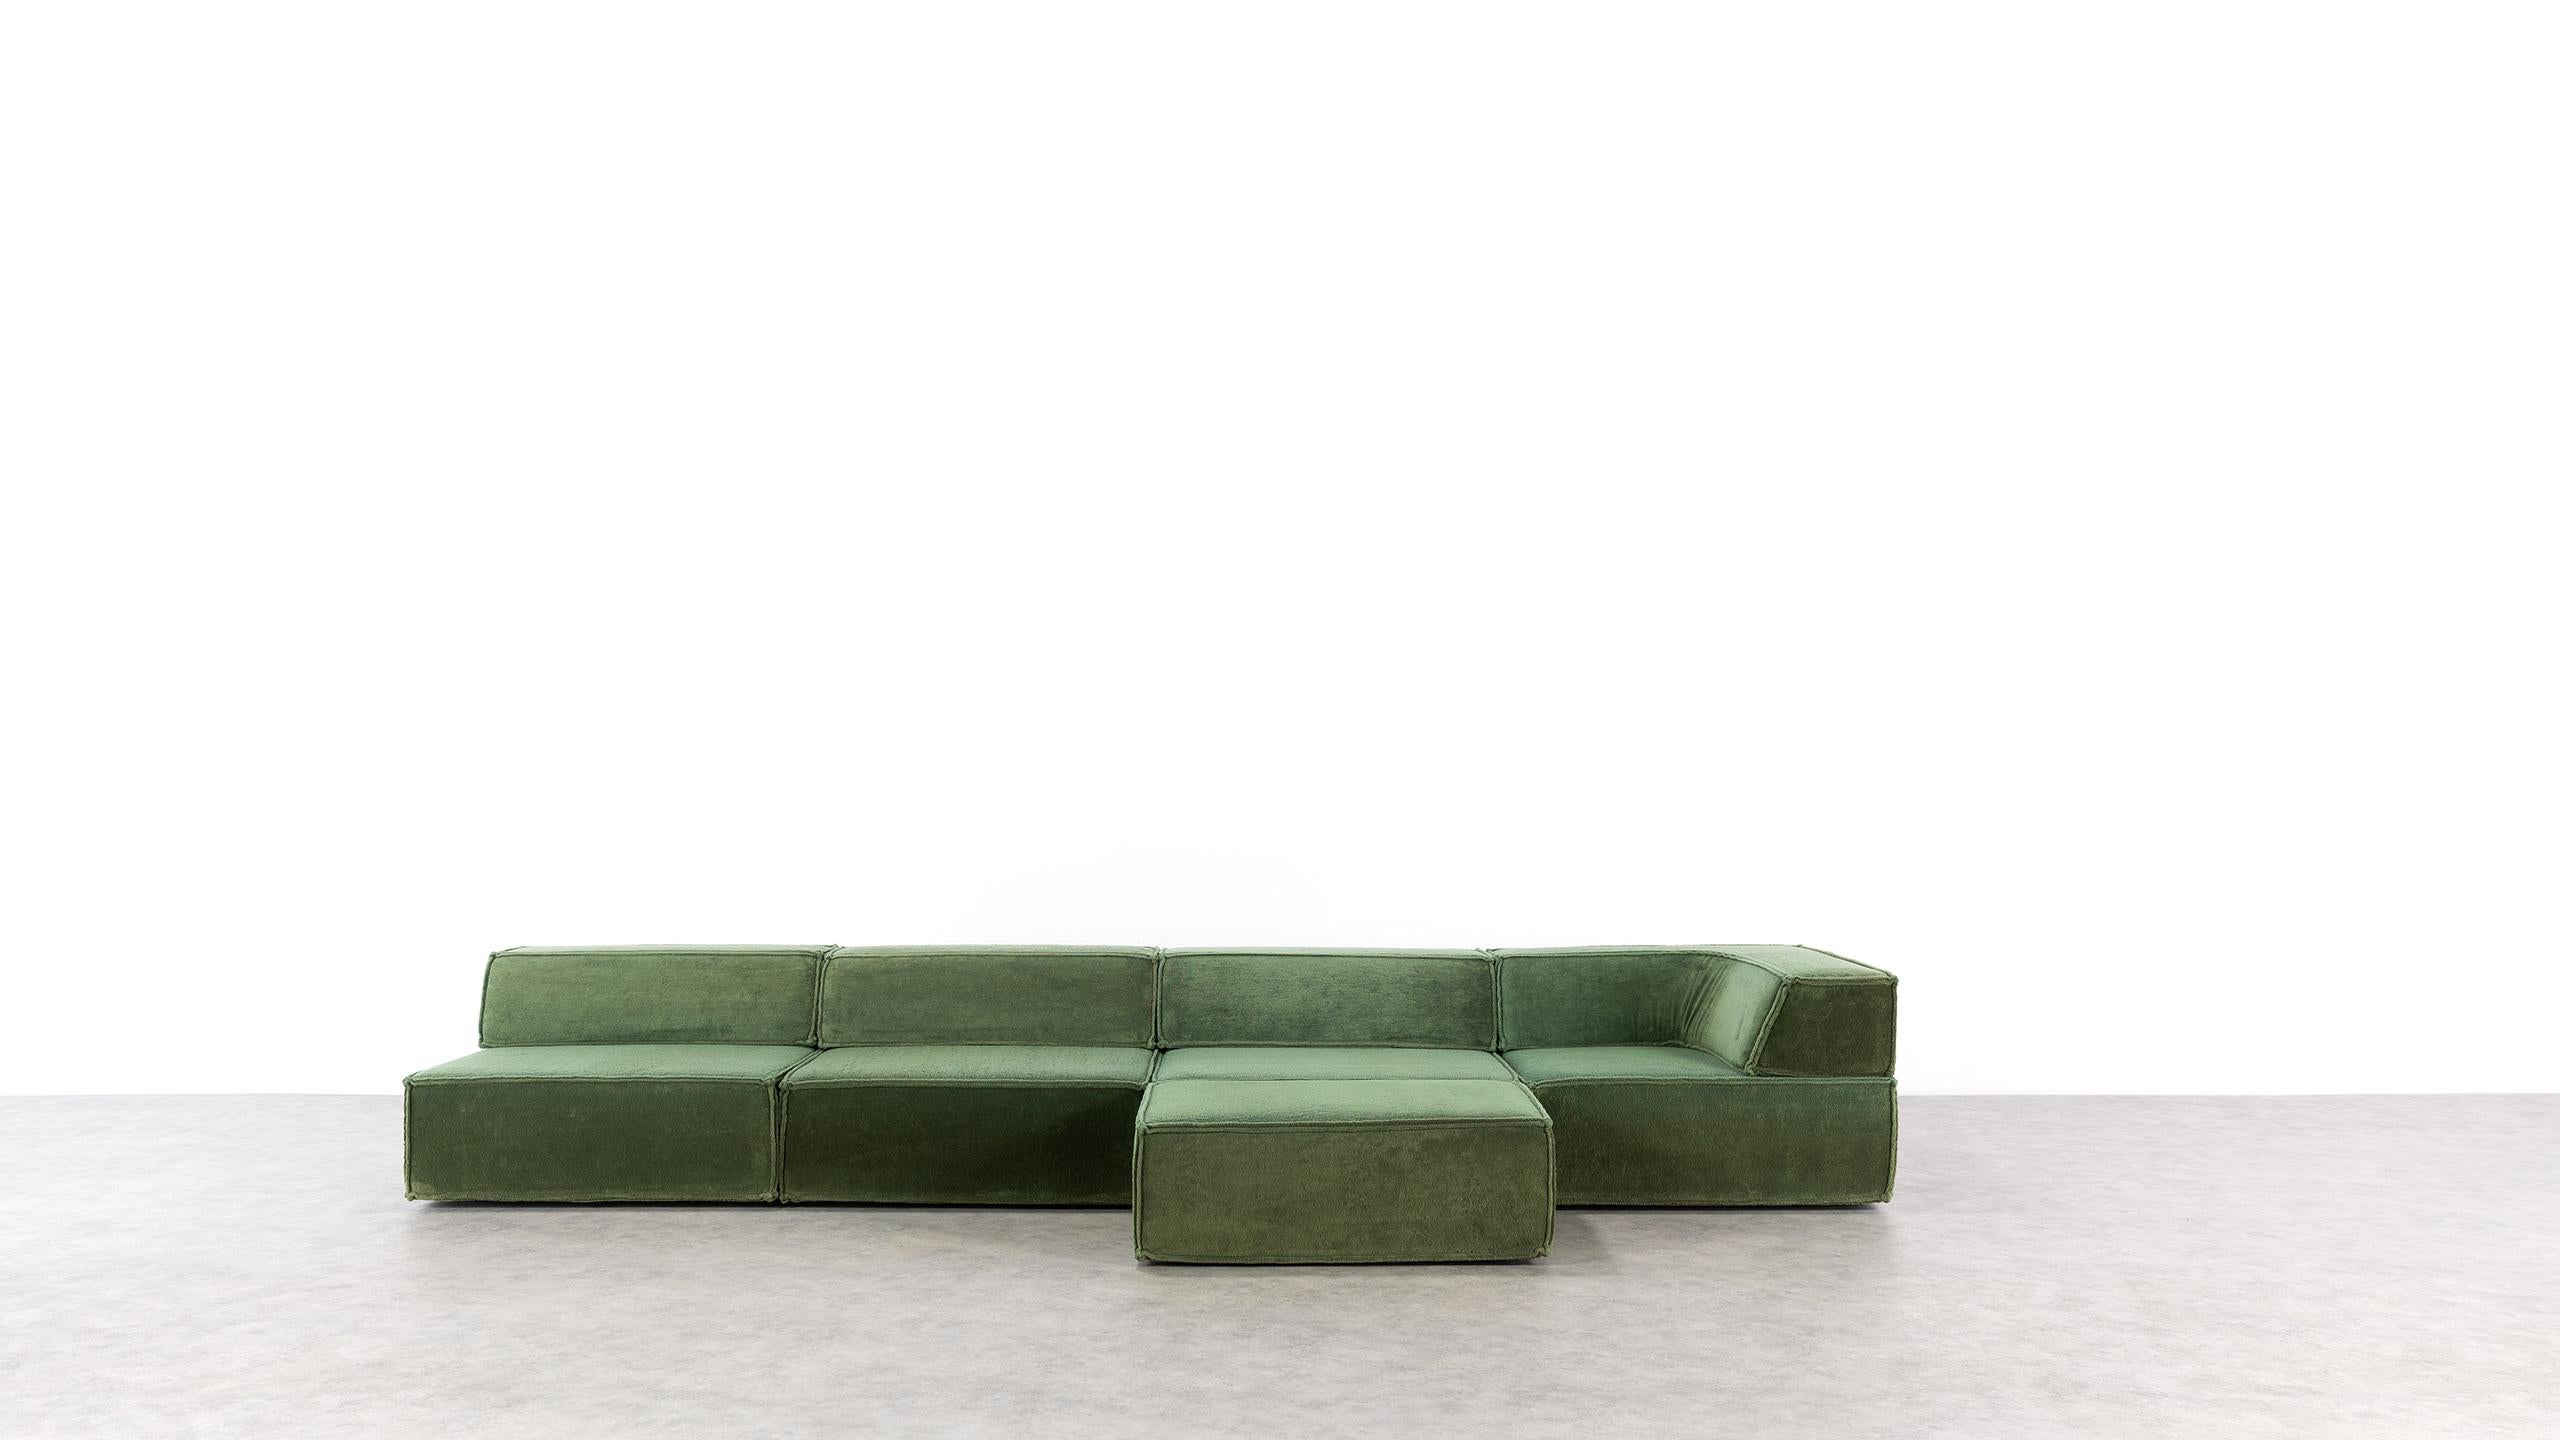 Fabric COR Trio Modular Sofa, Giant Landscape in Green, 1972 by Team Form AG, Swiss